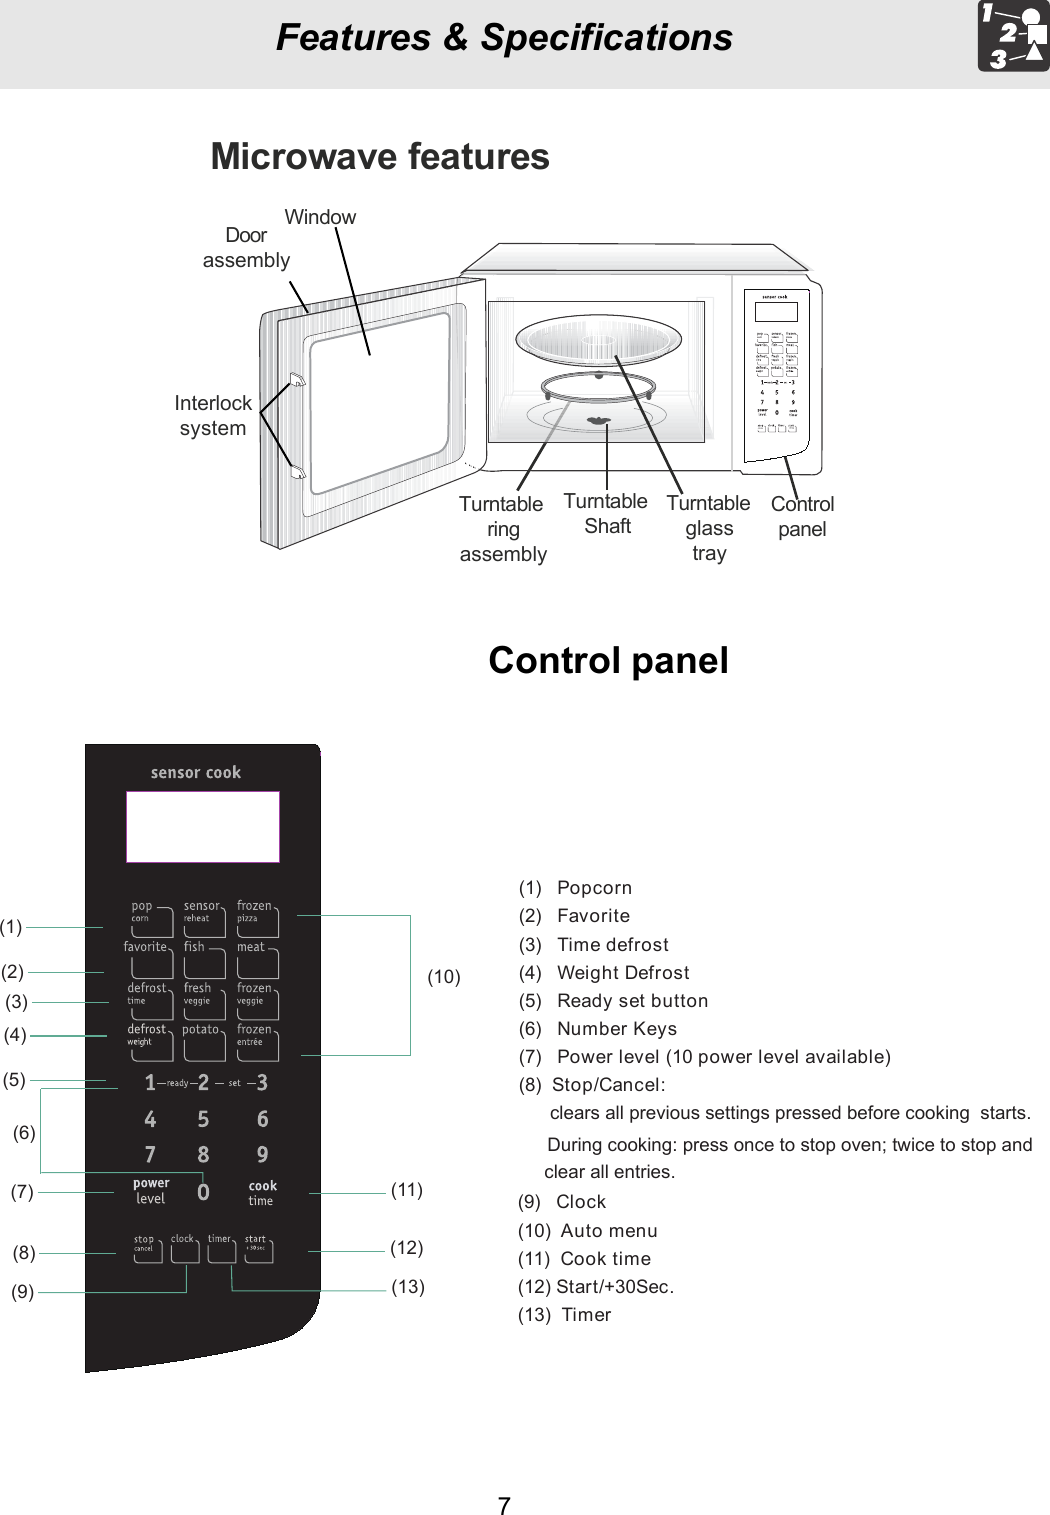 Features &amp; SpecificationsControl panelMicrowave featuresTurntableringassemblyTurntableglasstrayDoorassemblyInterlocksystemTurntableShaft ControlpanelWindow7(10)(1)(2)(3)(4)(5)(6)(7)(8)(9)(11)(12)(13)(1)   Popcorn(2)   Favorite(3)   Time defrost(4)   Weight Defrost(5)   Ready set button(6)   Number Keys(8)  Stop/Cancel: (9)   Clock(10)  Auto menu(12) Start/+30Sec.(13)  Timer(7)   Power level (10 power level available)clears all previous settings pressed before cooking  starts.      During cooking: press once to stop oven; twice to stop and clear all entries.(11)  Cook time